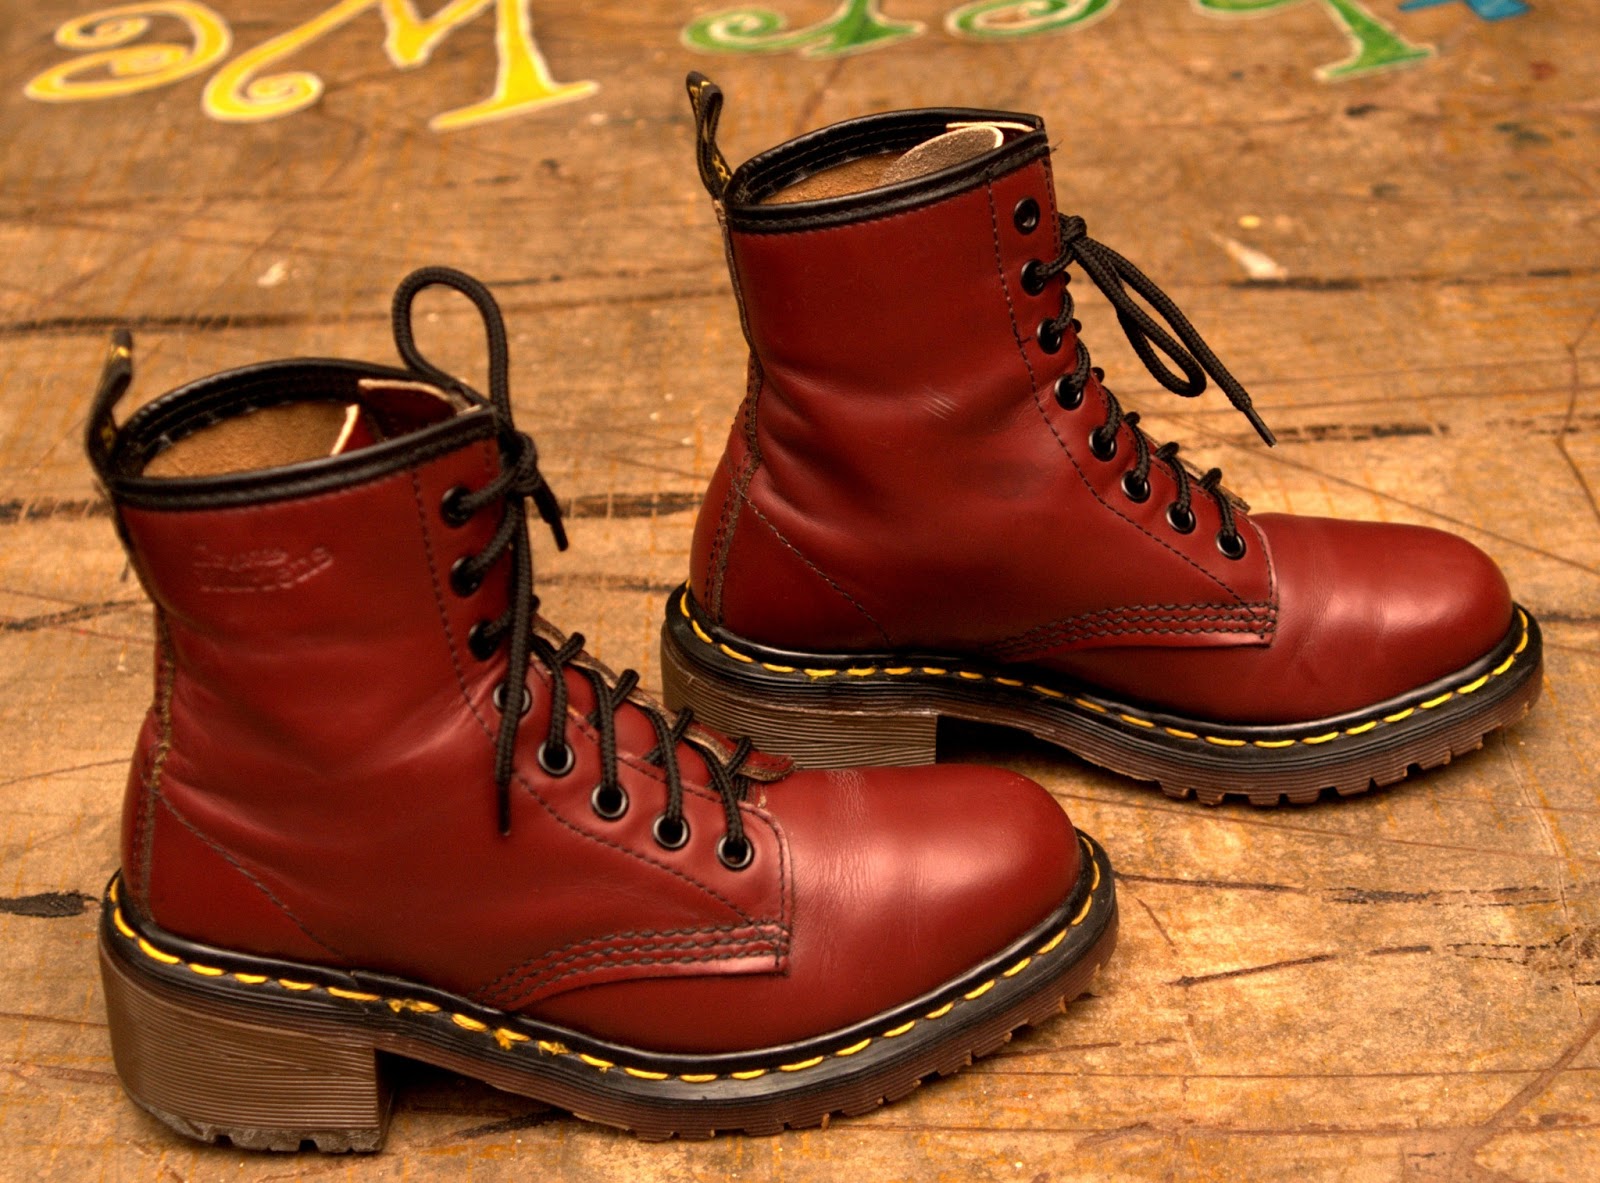 6T's Boutique: Dr. Martens / Mary Jane Boots 2014